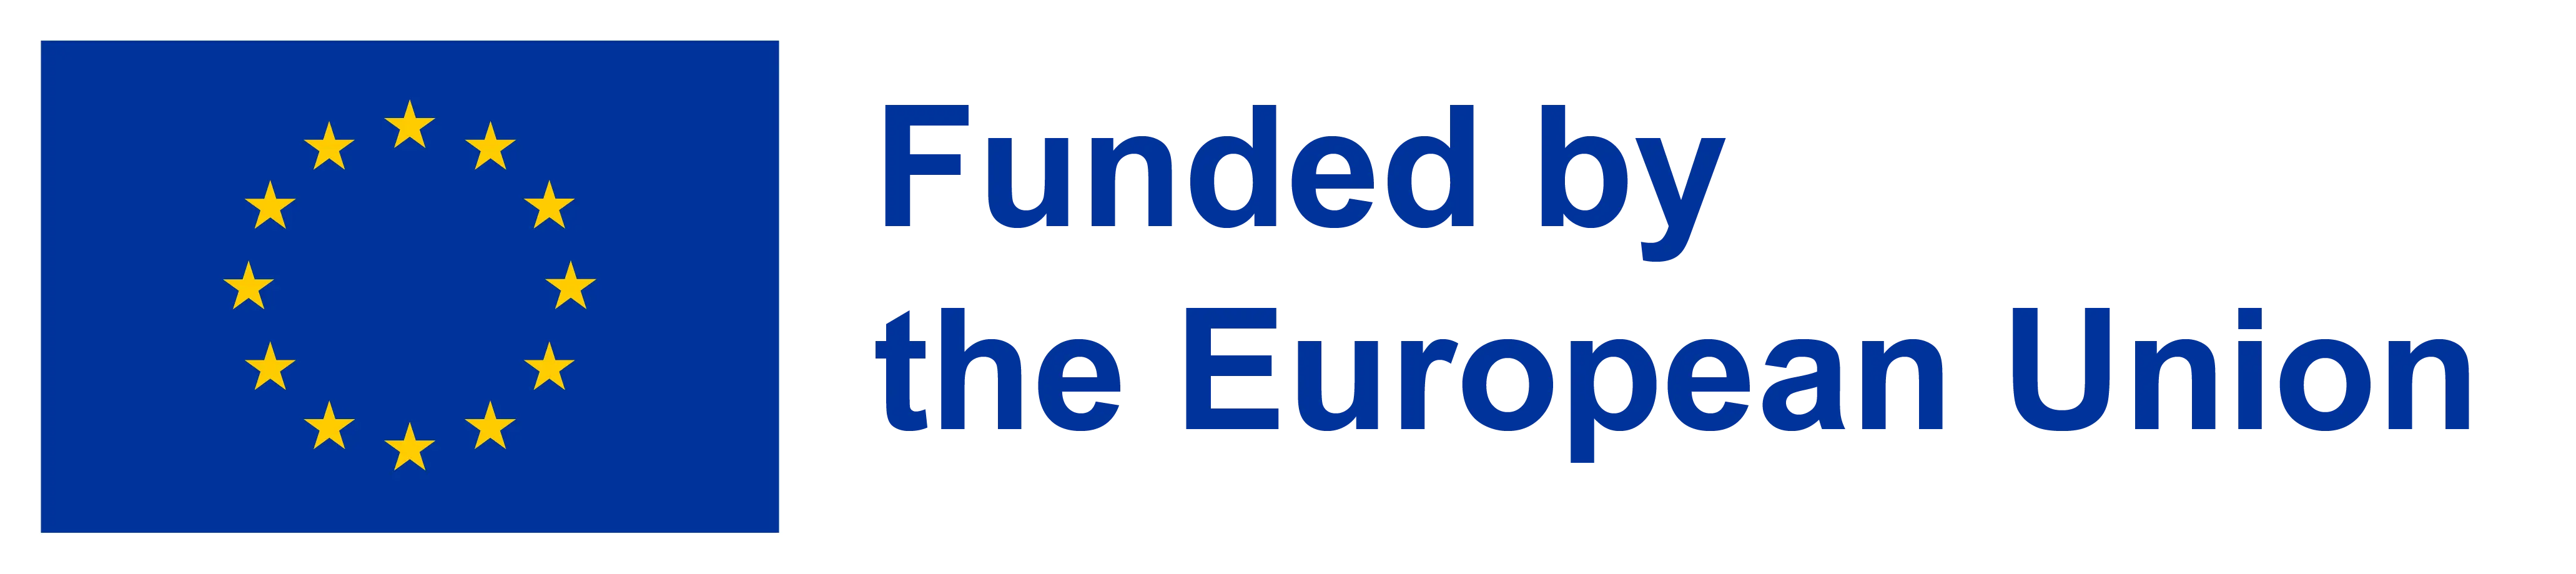 funded by the EU logo